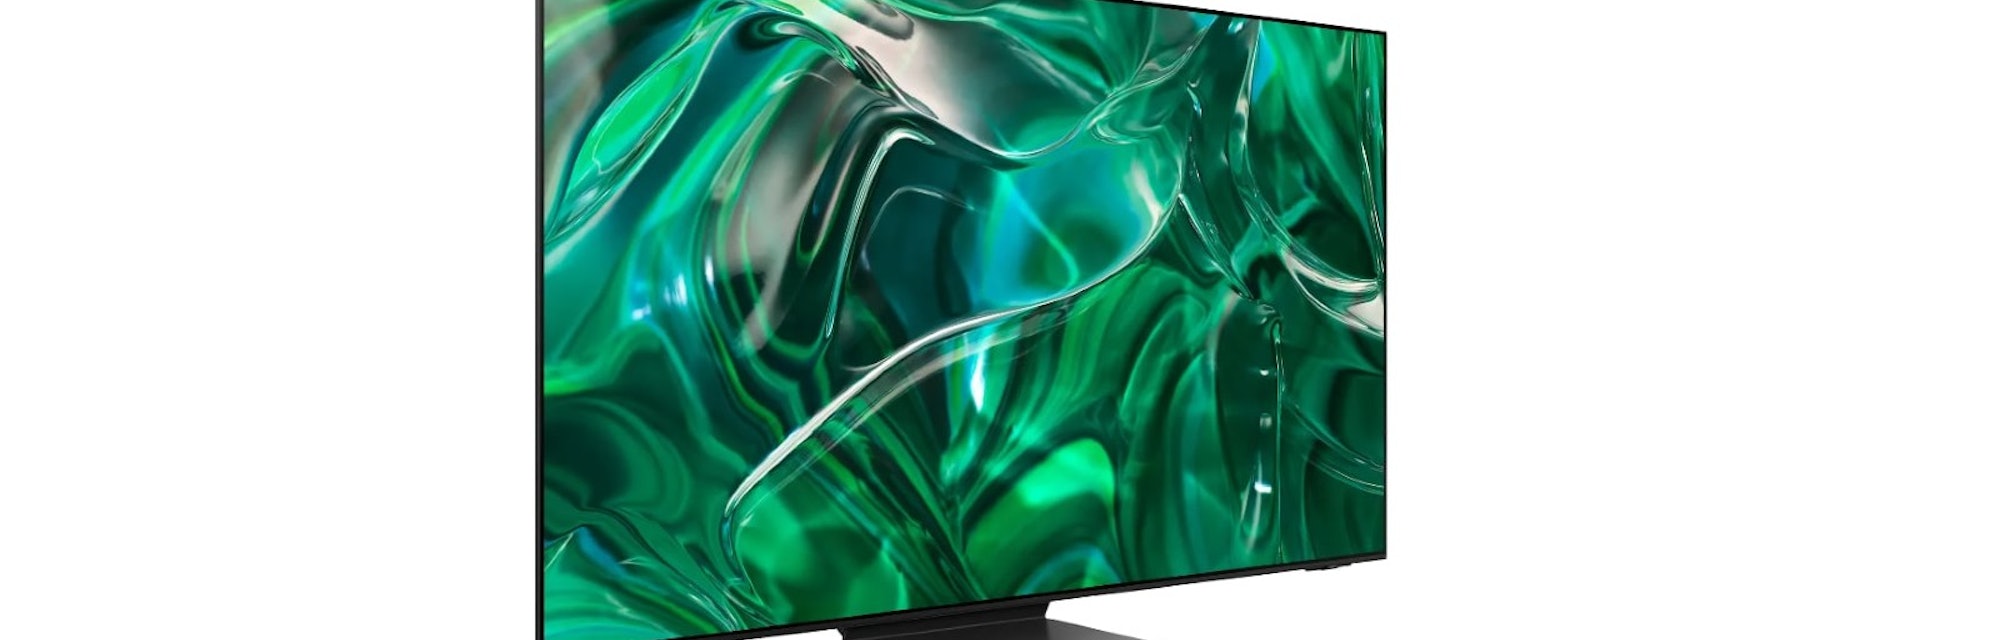 Samsung's S95C TV may be its brightest QD-OLED yet